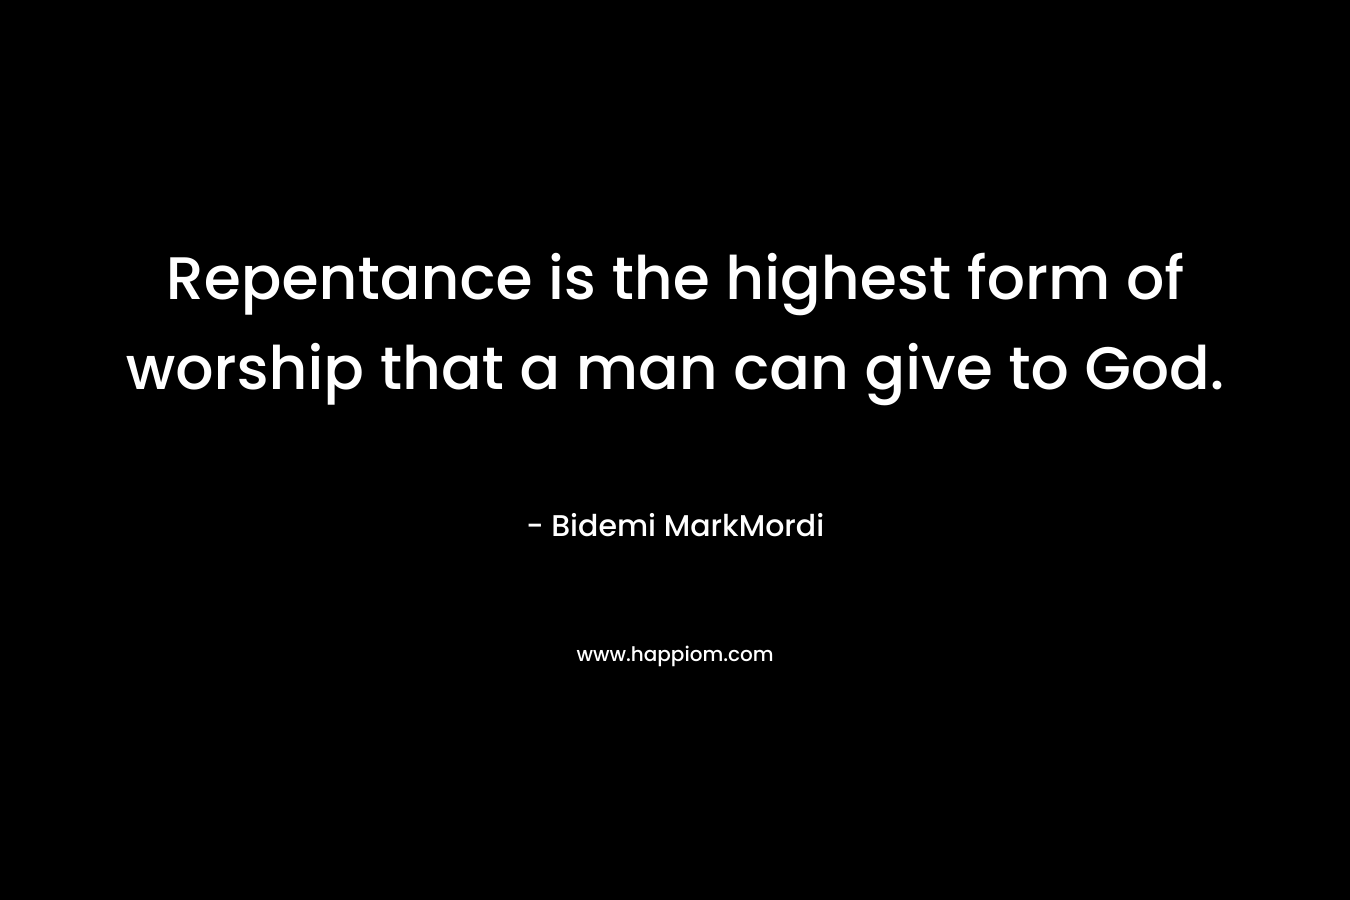 Repentance is the highest form of worship that a man can give to God. – Bidemi MarkMordi